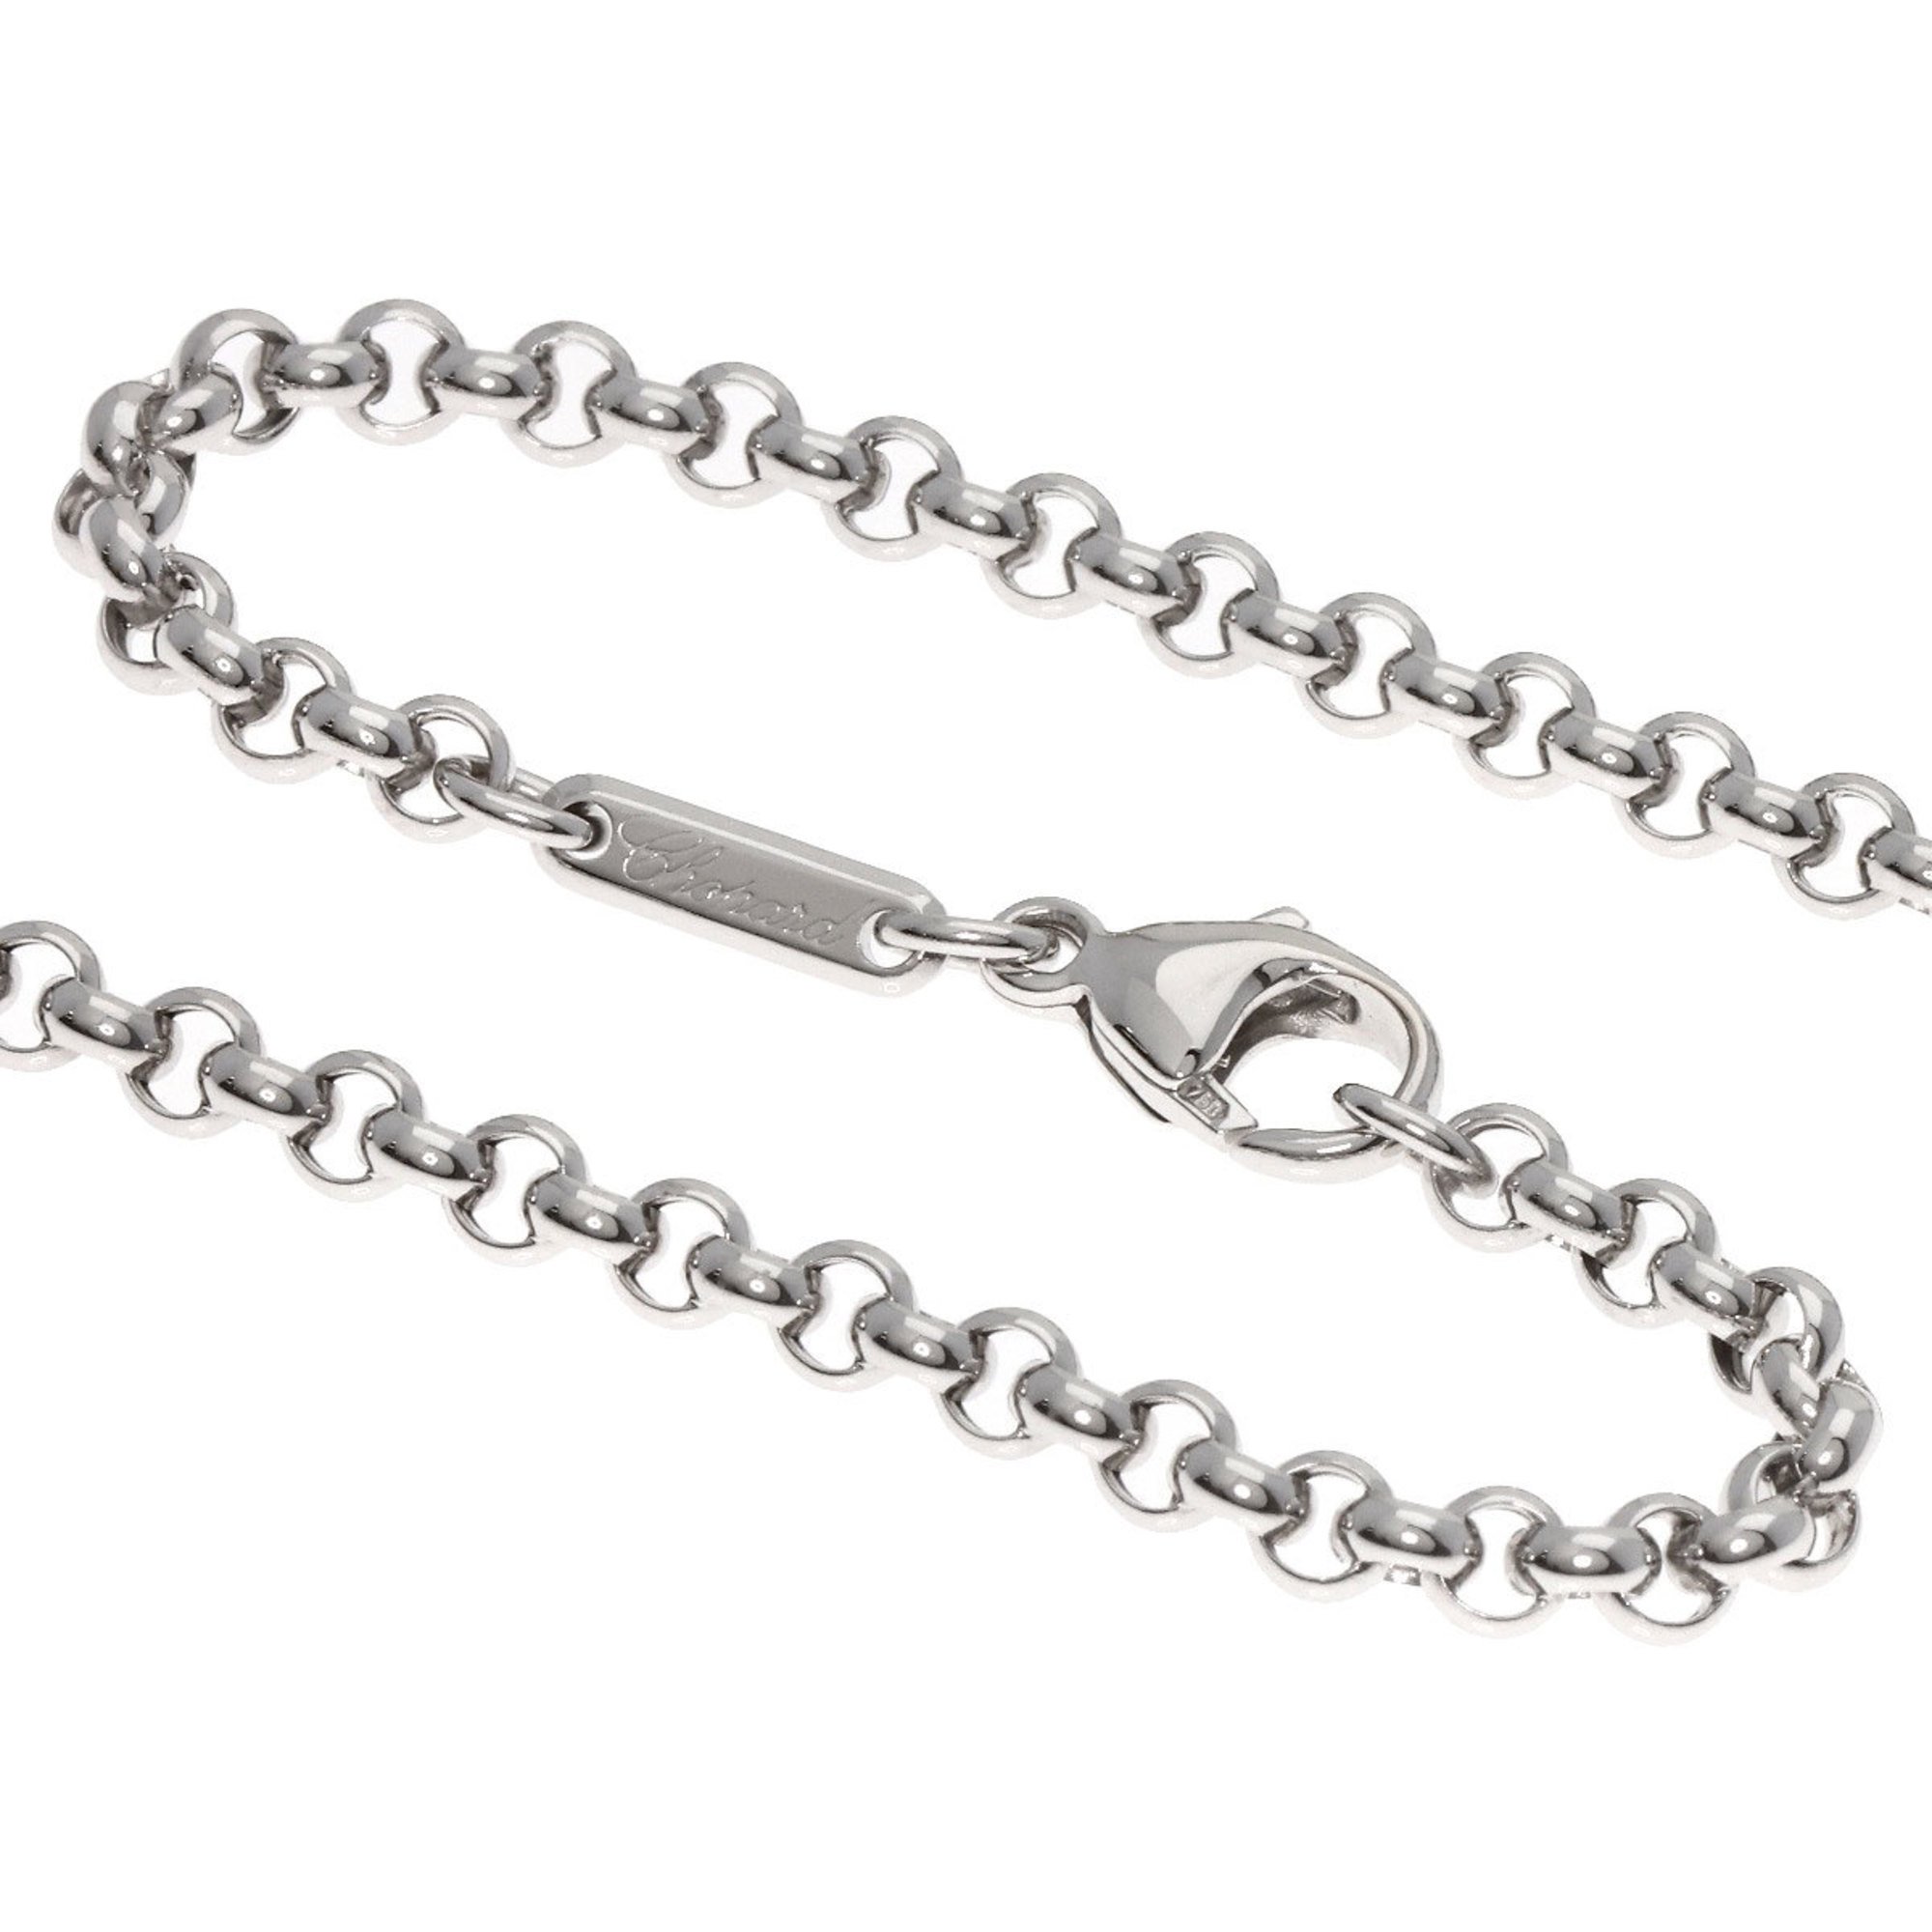 Chopard Chain Only 42cm Necklace K18 White Gold Women's